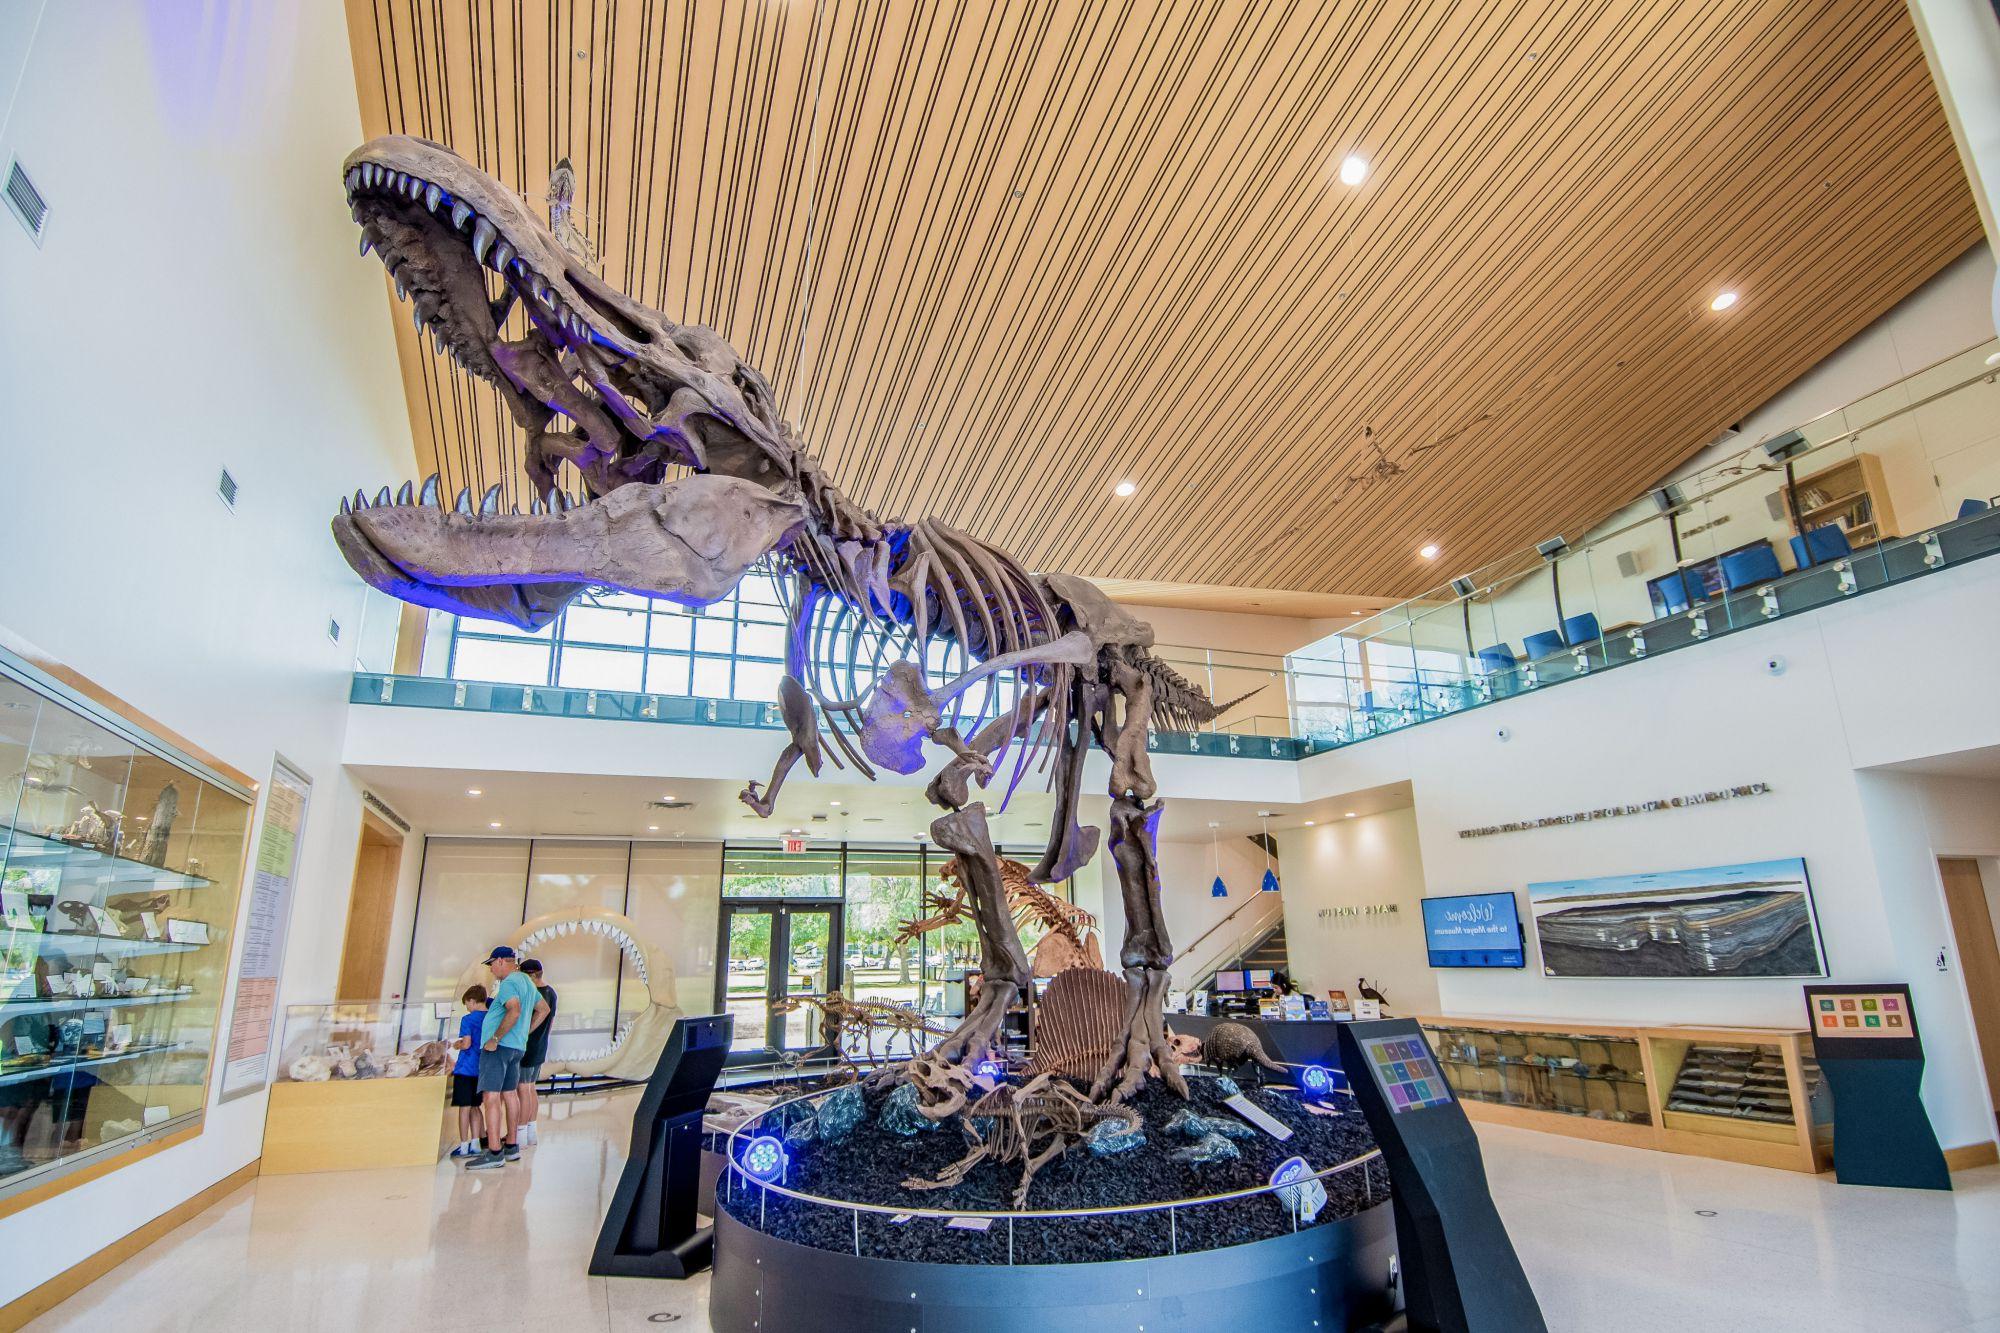 The Dinosaur statue at the Mayer Museum